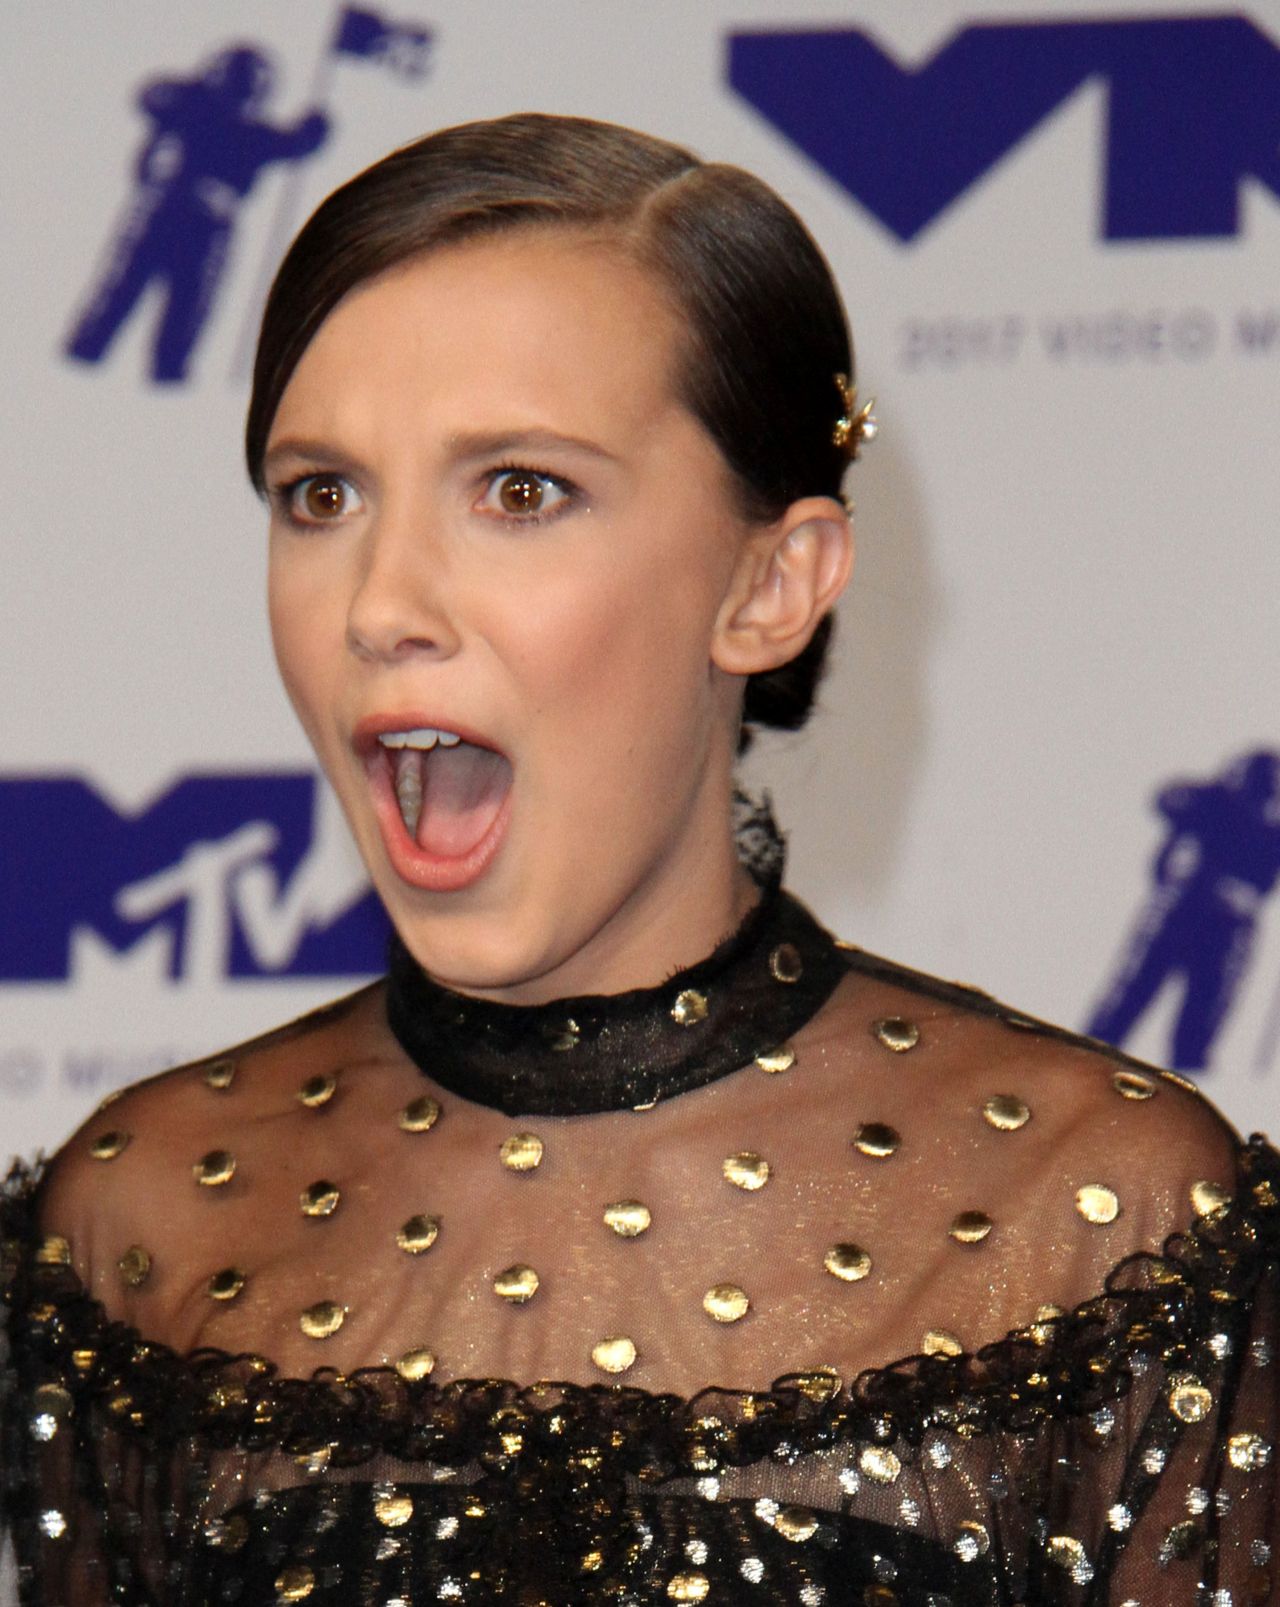 Millie bobby brown mouth open